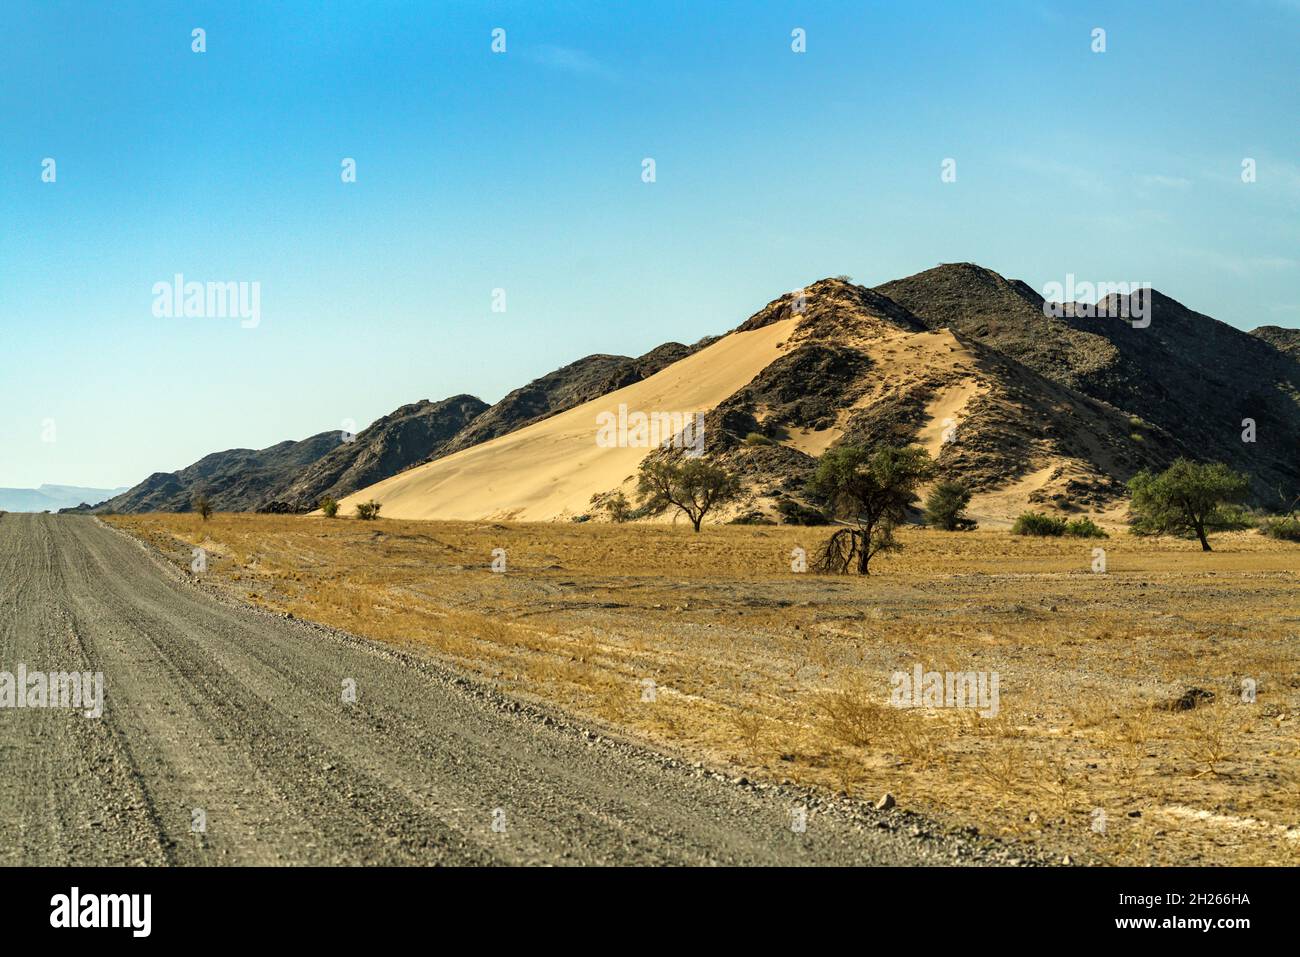 Road scenery in northern Namibia Africa Stock Photo